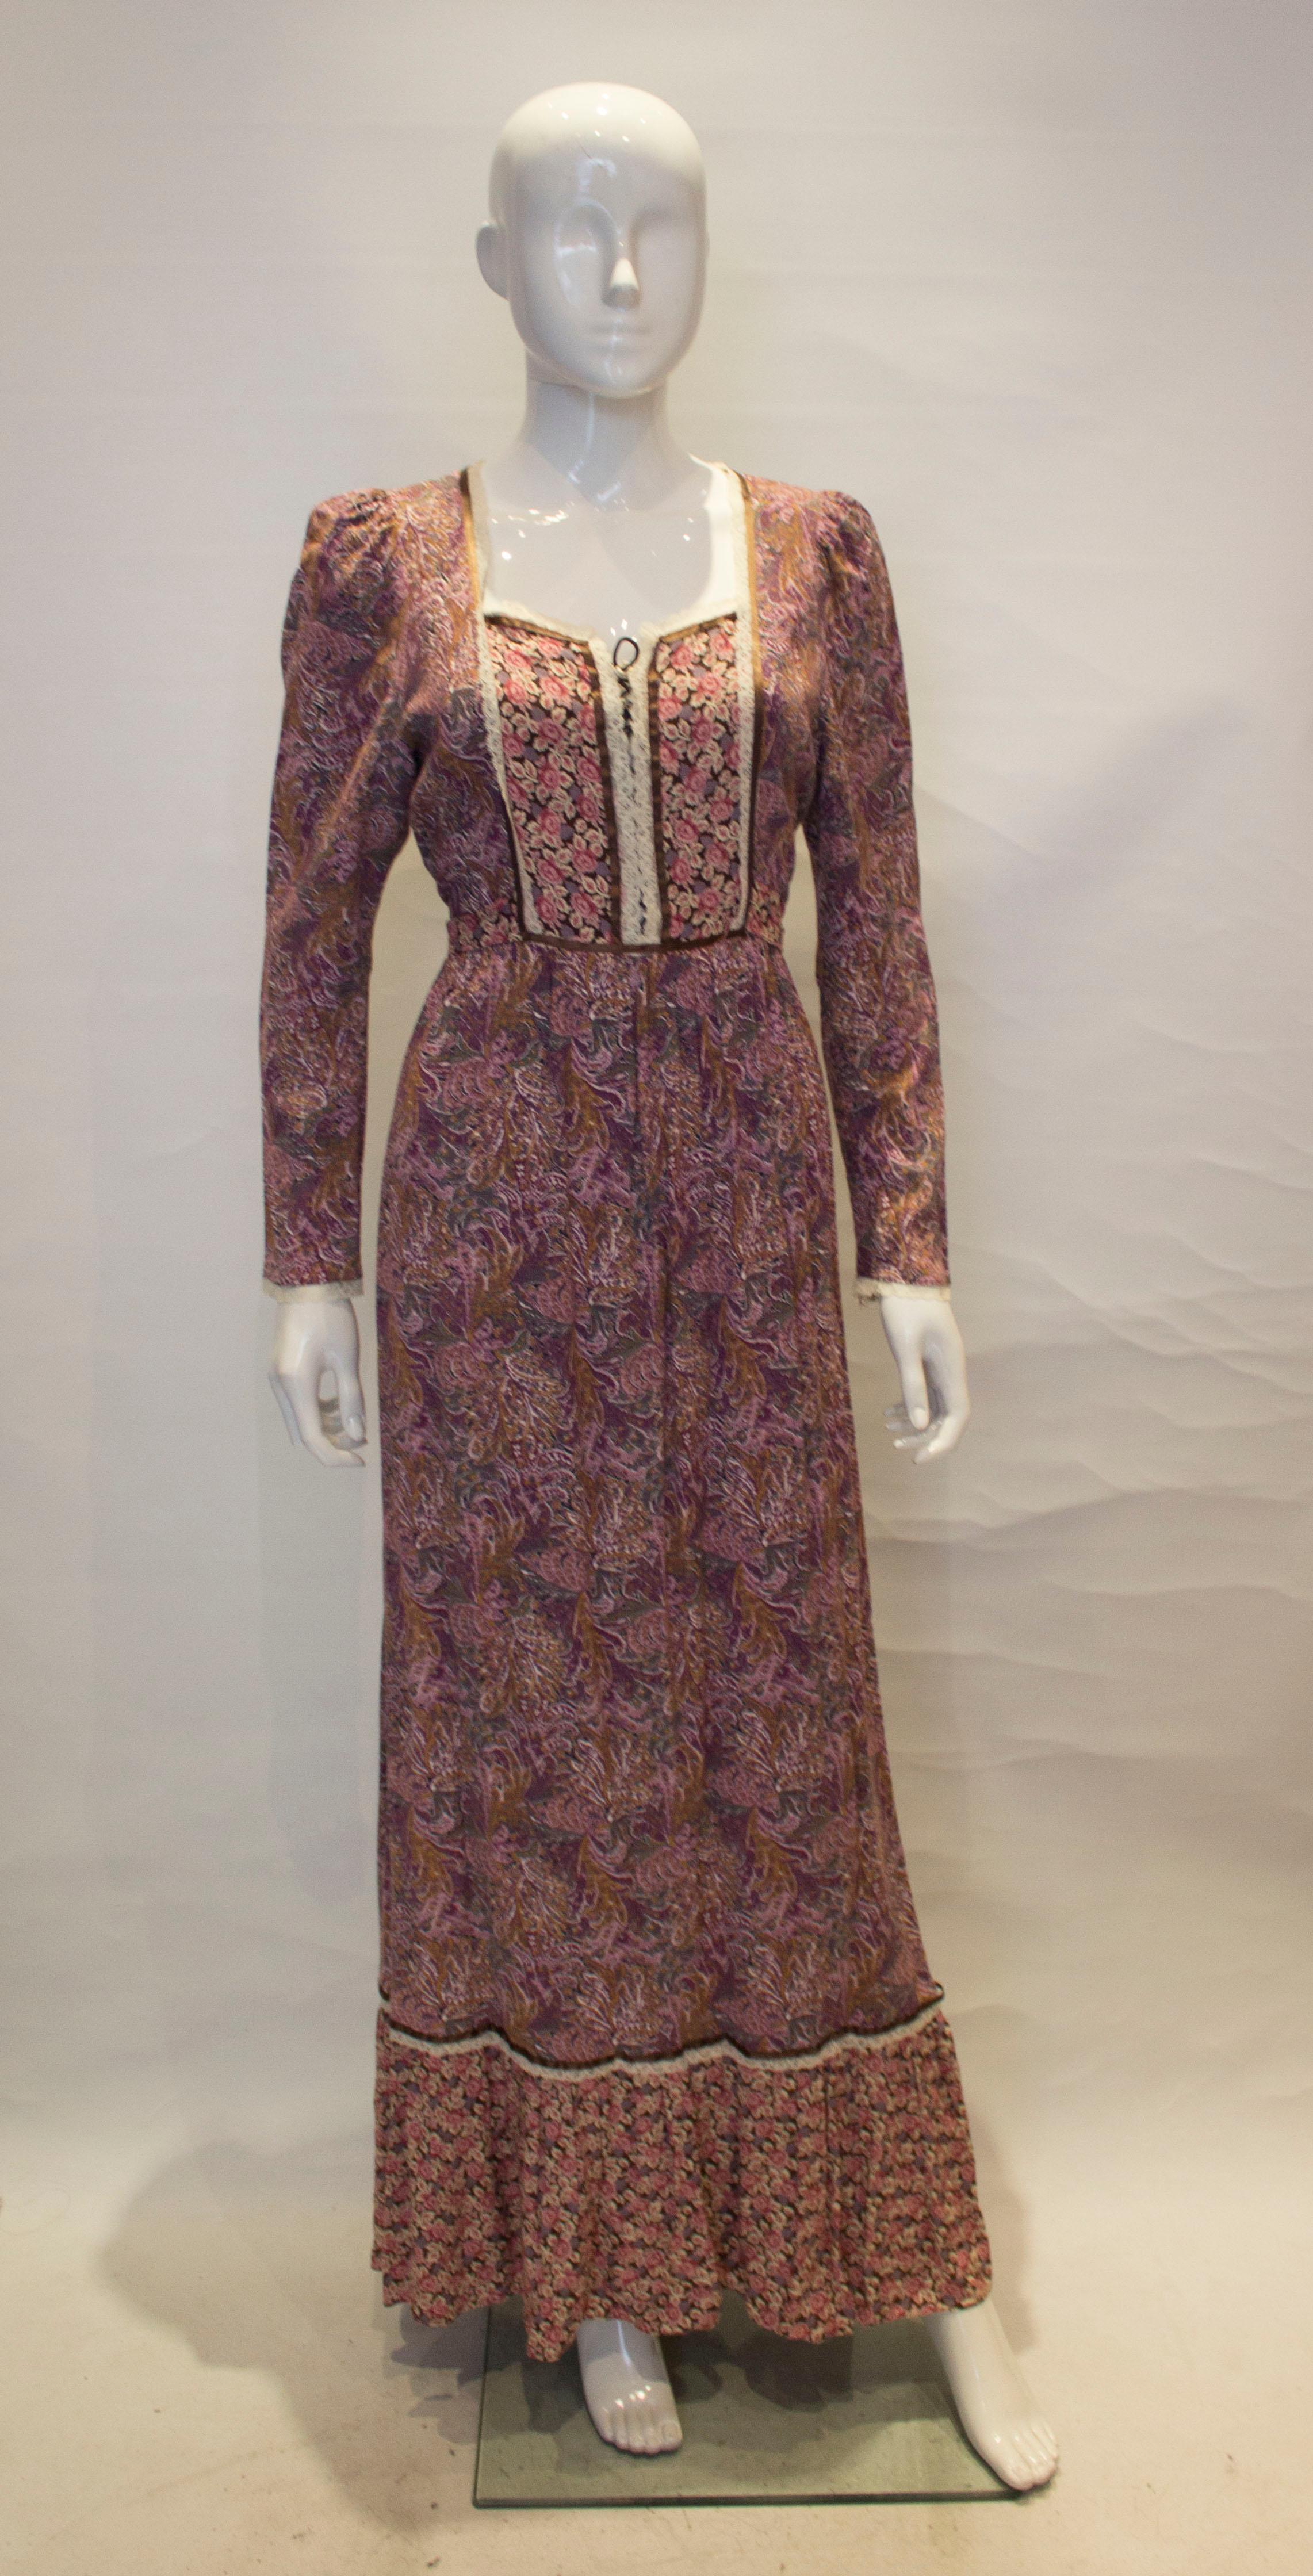 A fun vintage dress by Concepts by Samuel Sherman.  The dress is a great clash of prints, with a lace and lace up detail on the front. It has a central back zip, frill at the hem and sel fabric waist tie.